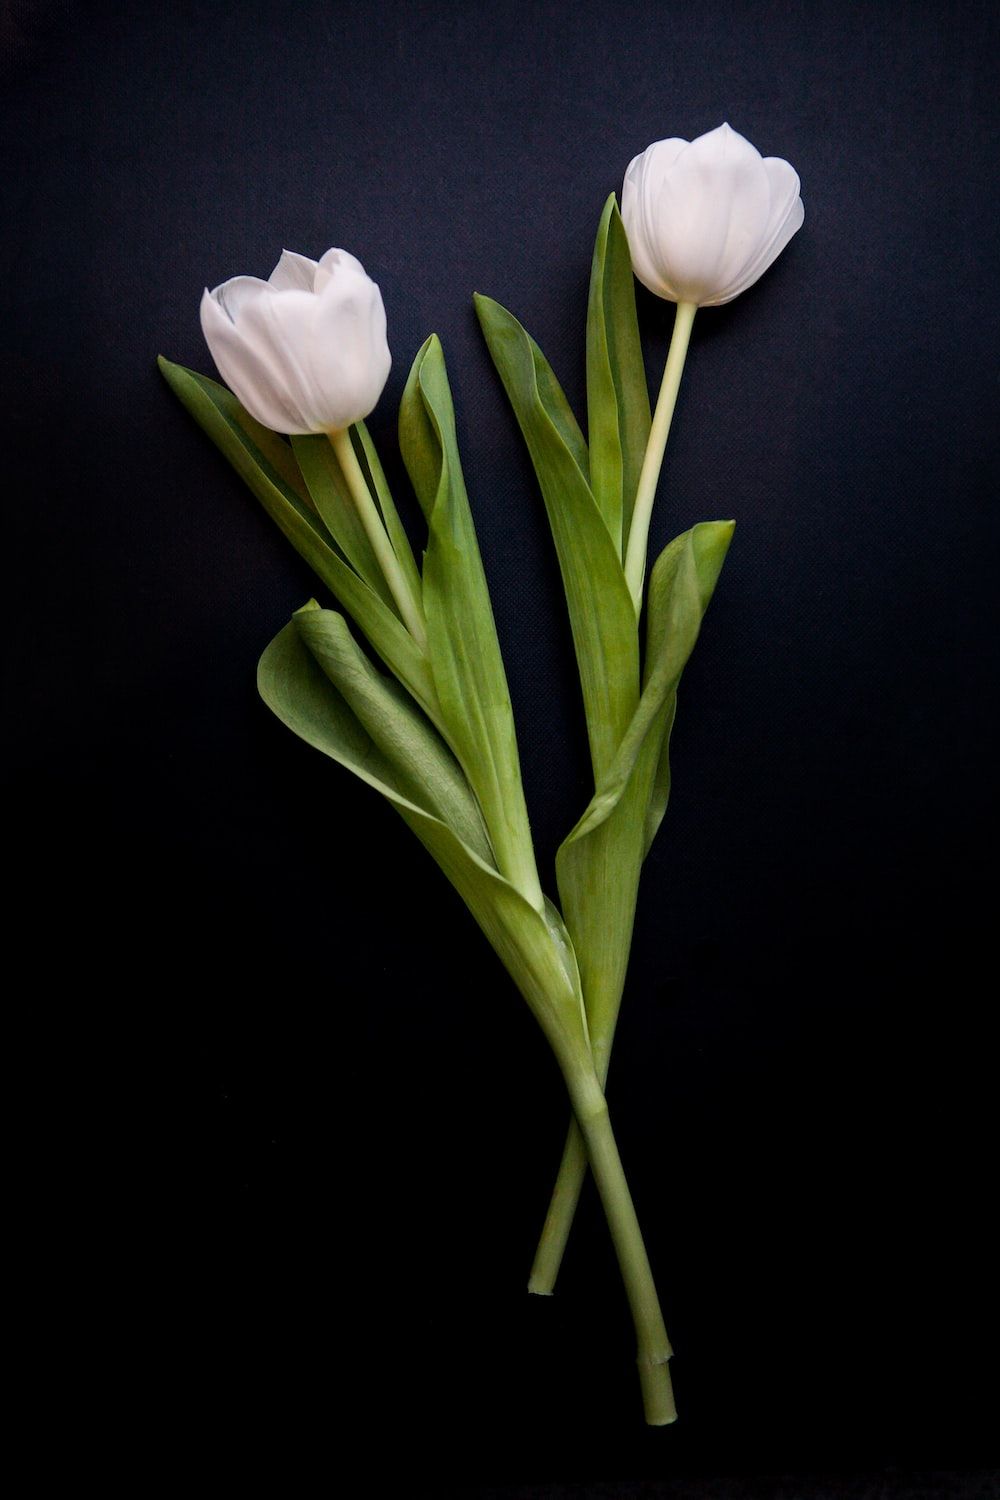 Two white flowers with green leaves on a black background - Tulip